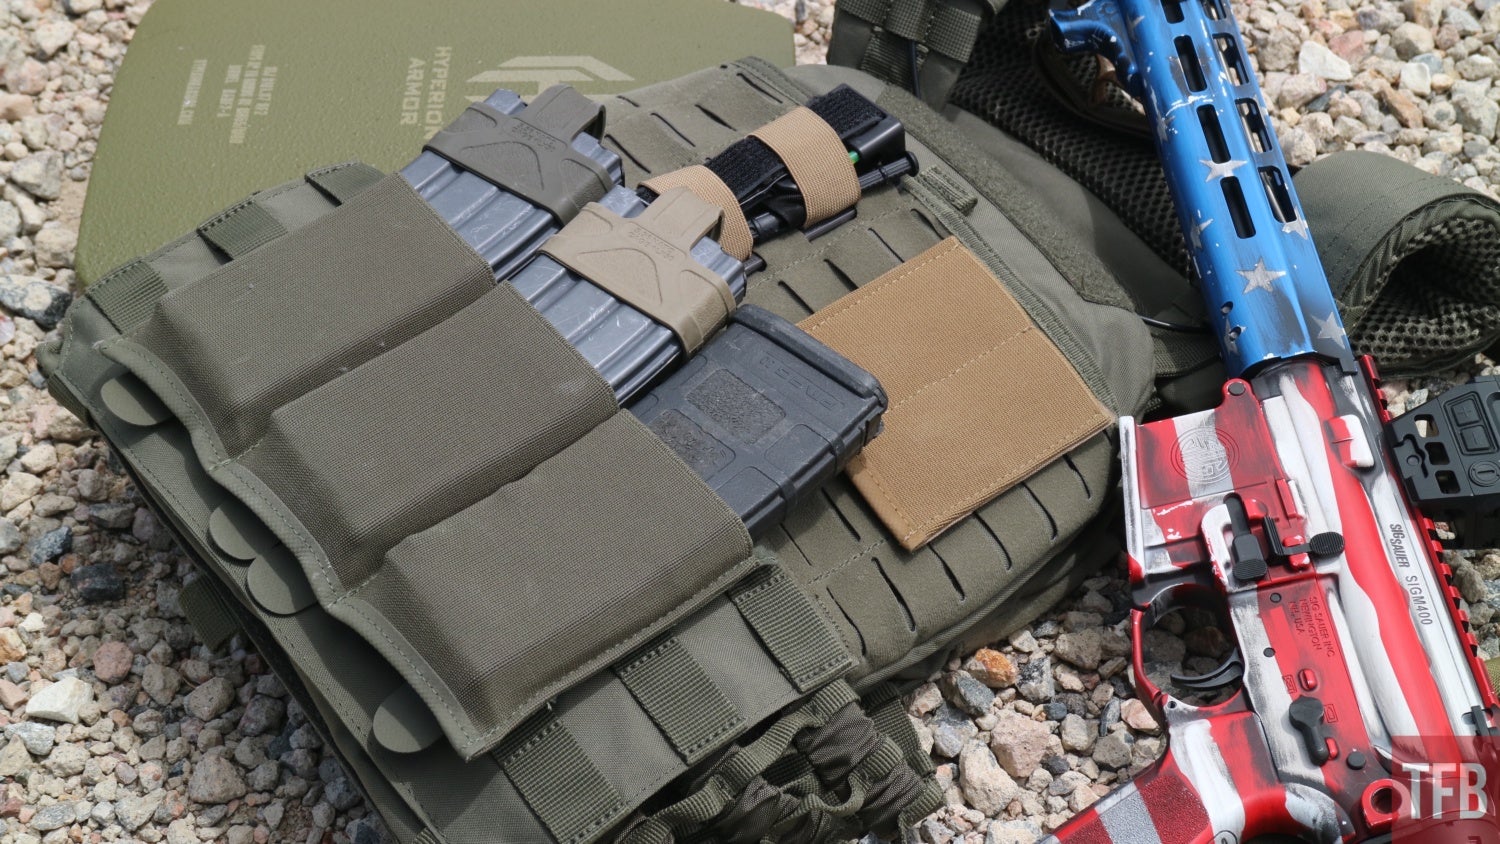 TFB Review: The 5.11 Tactical TacTec Plate Carrier